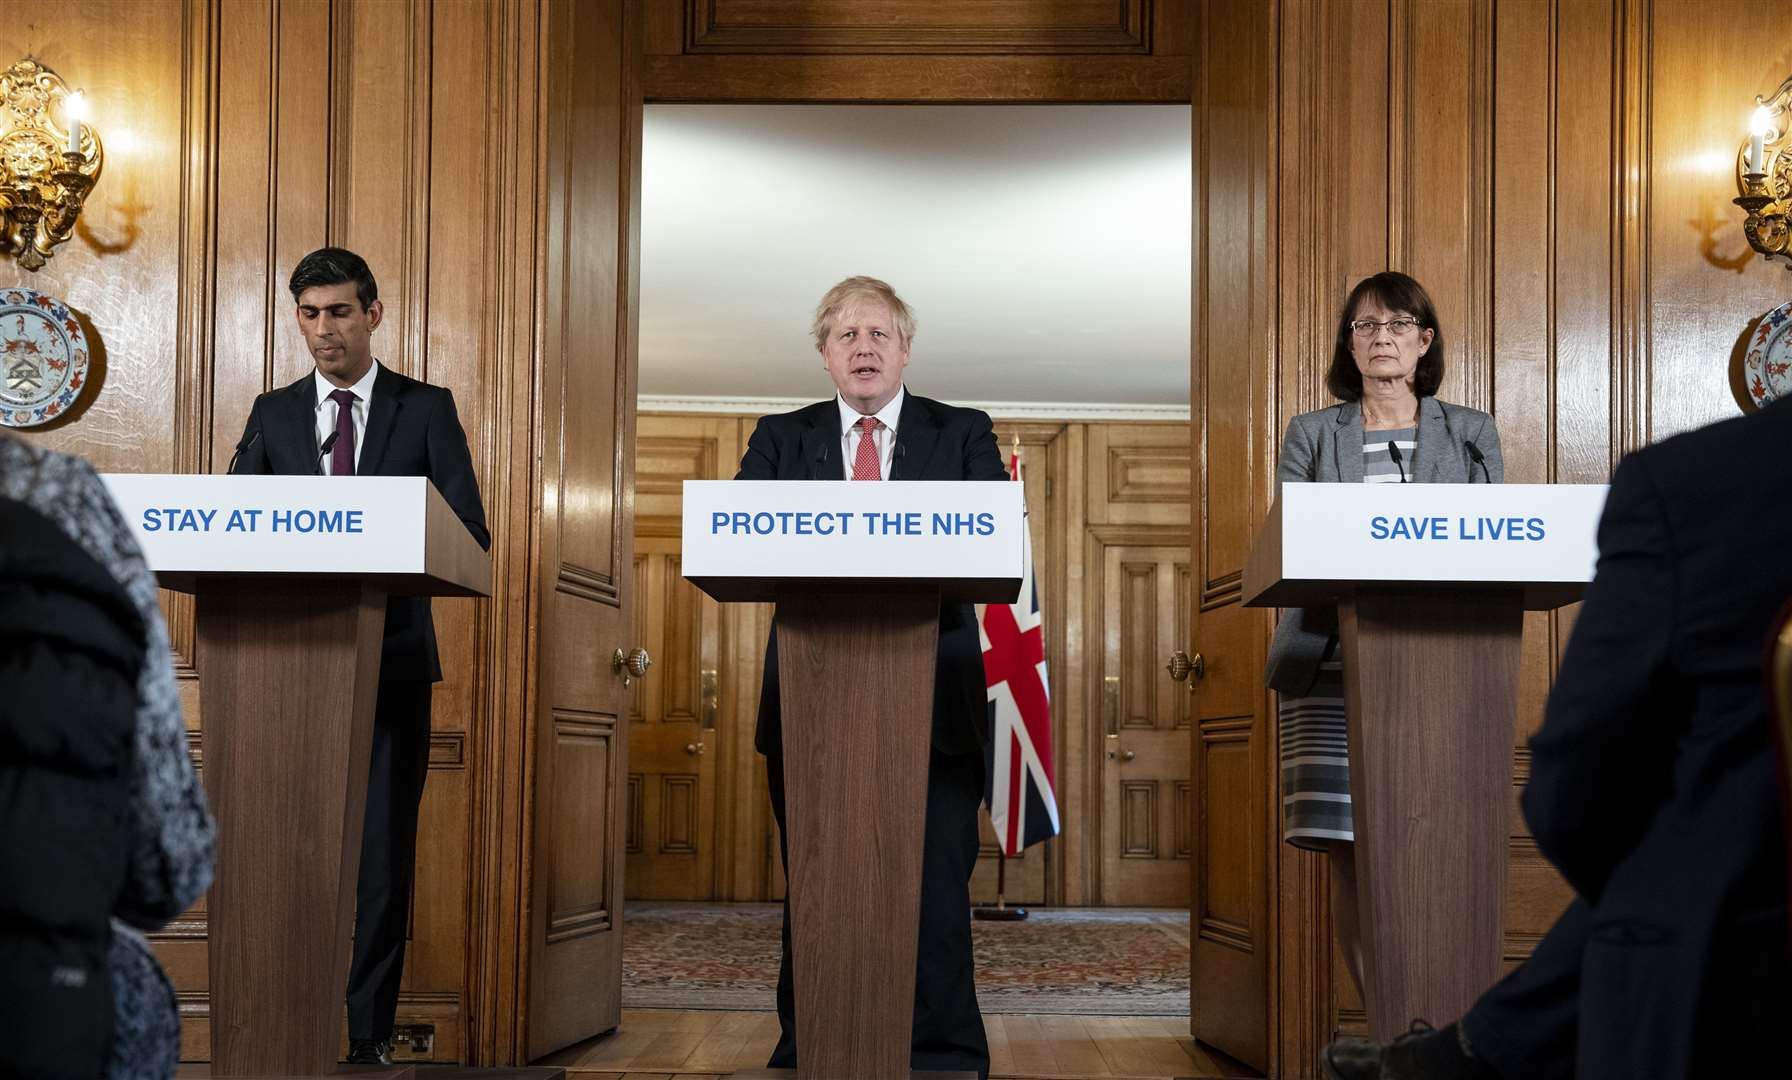 Dr Jenny Harries with Boris Johnson and Rishi Sunak during a Downing Street press conference. Picture by Pippa Fowles / No 10 Downing Street.